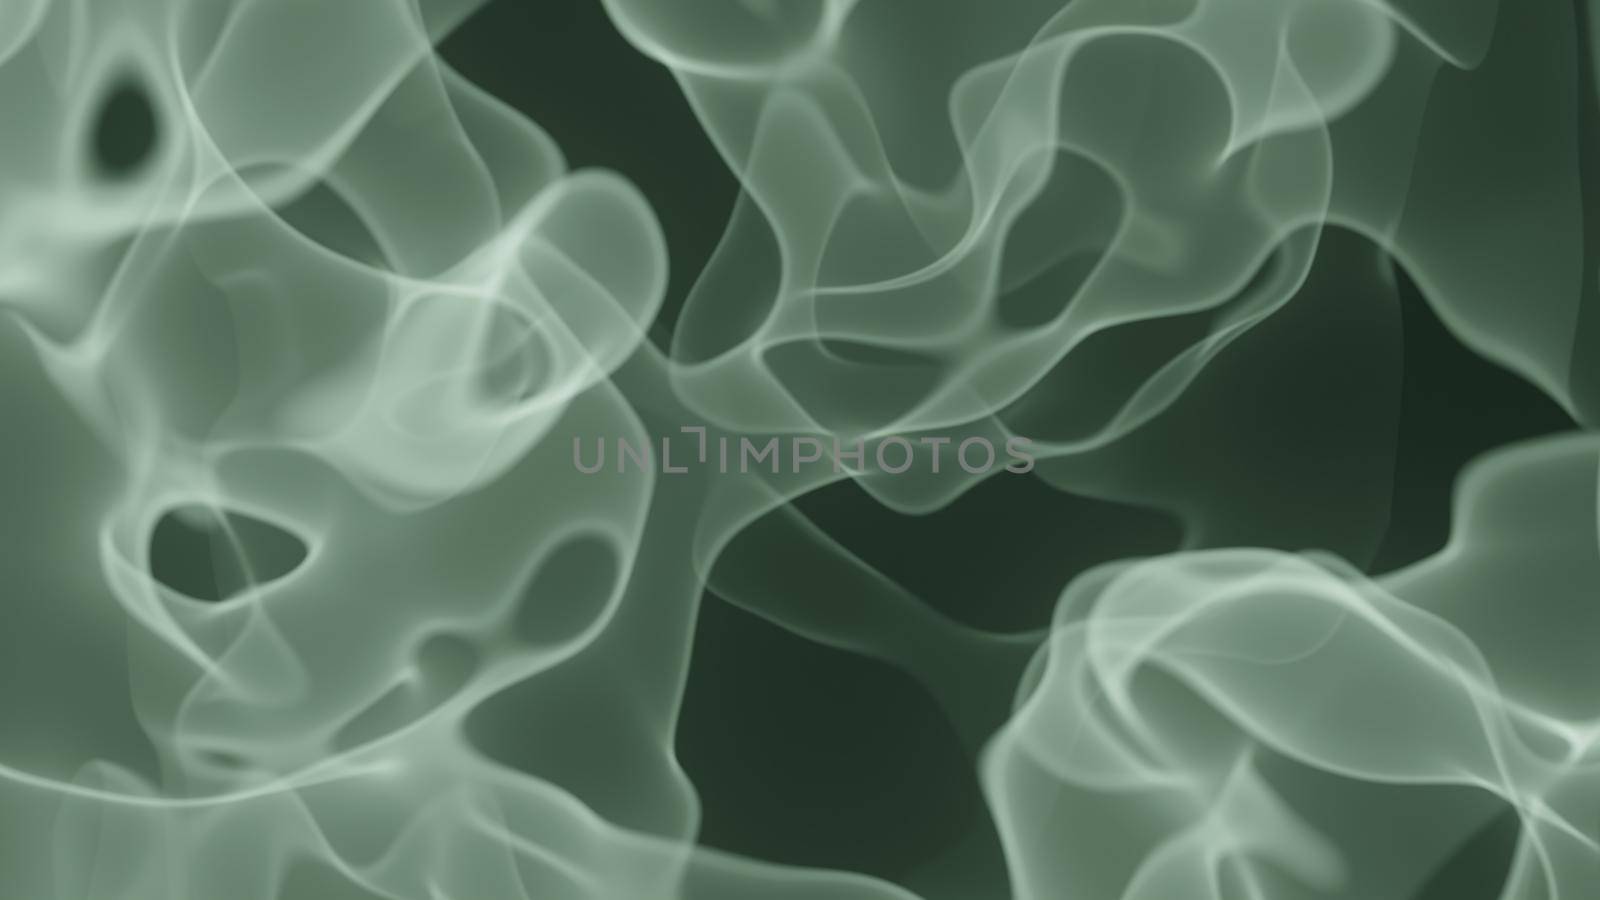 Dynamic rushing substance or smoke 3d illustration. Texture of ethereal incense or spirit with tiny glow. by raferto1973